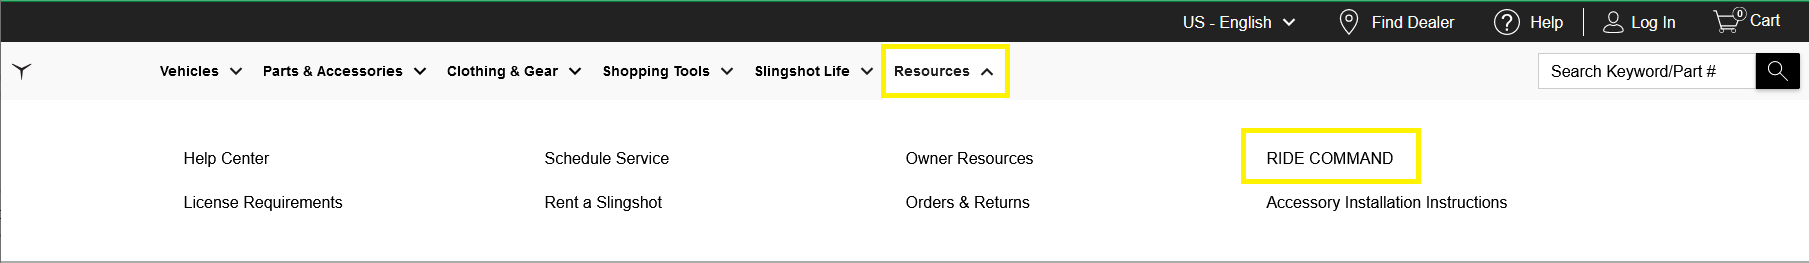 RESOURCES>RIDE COMMAND